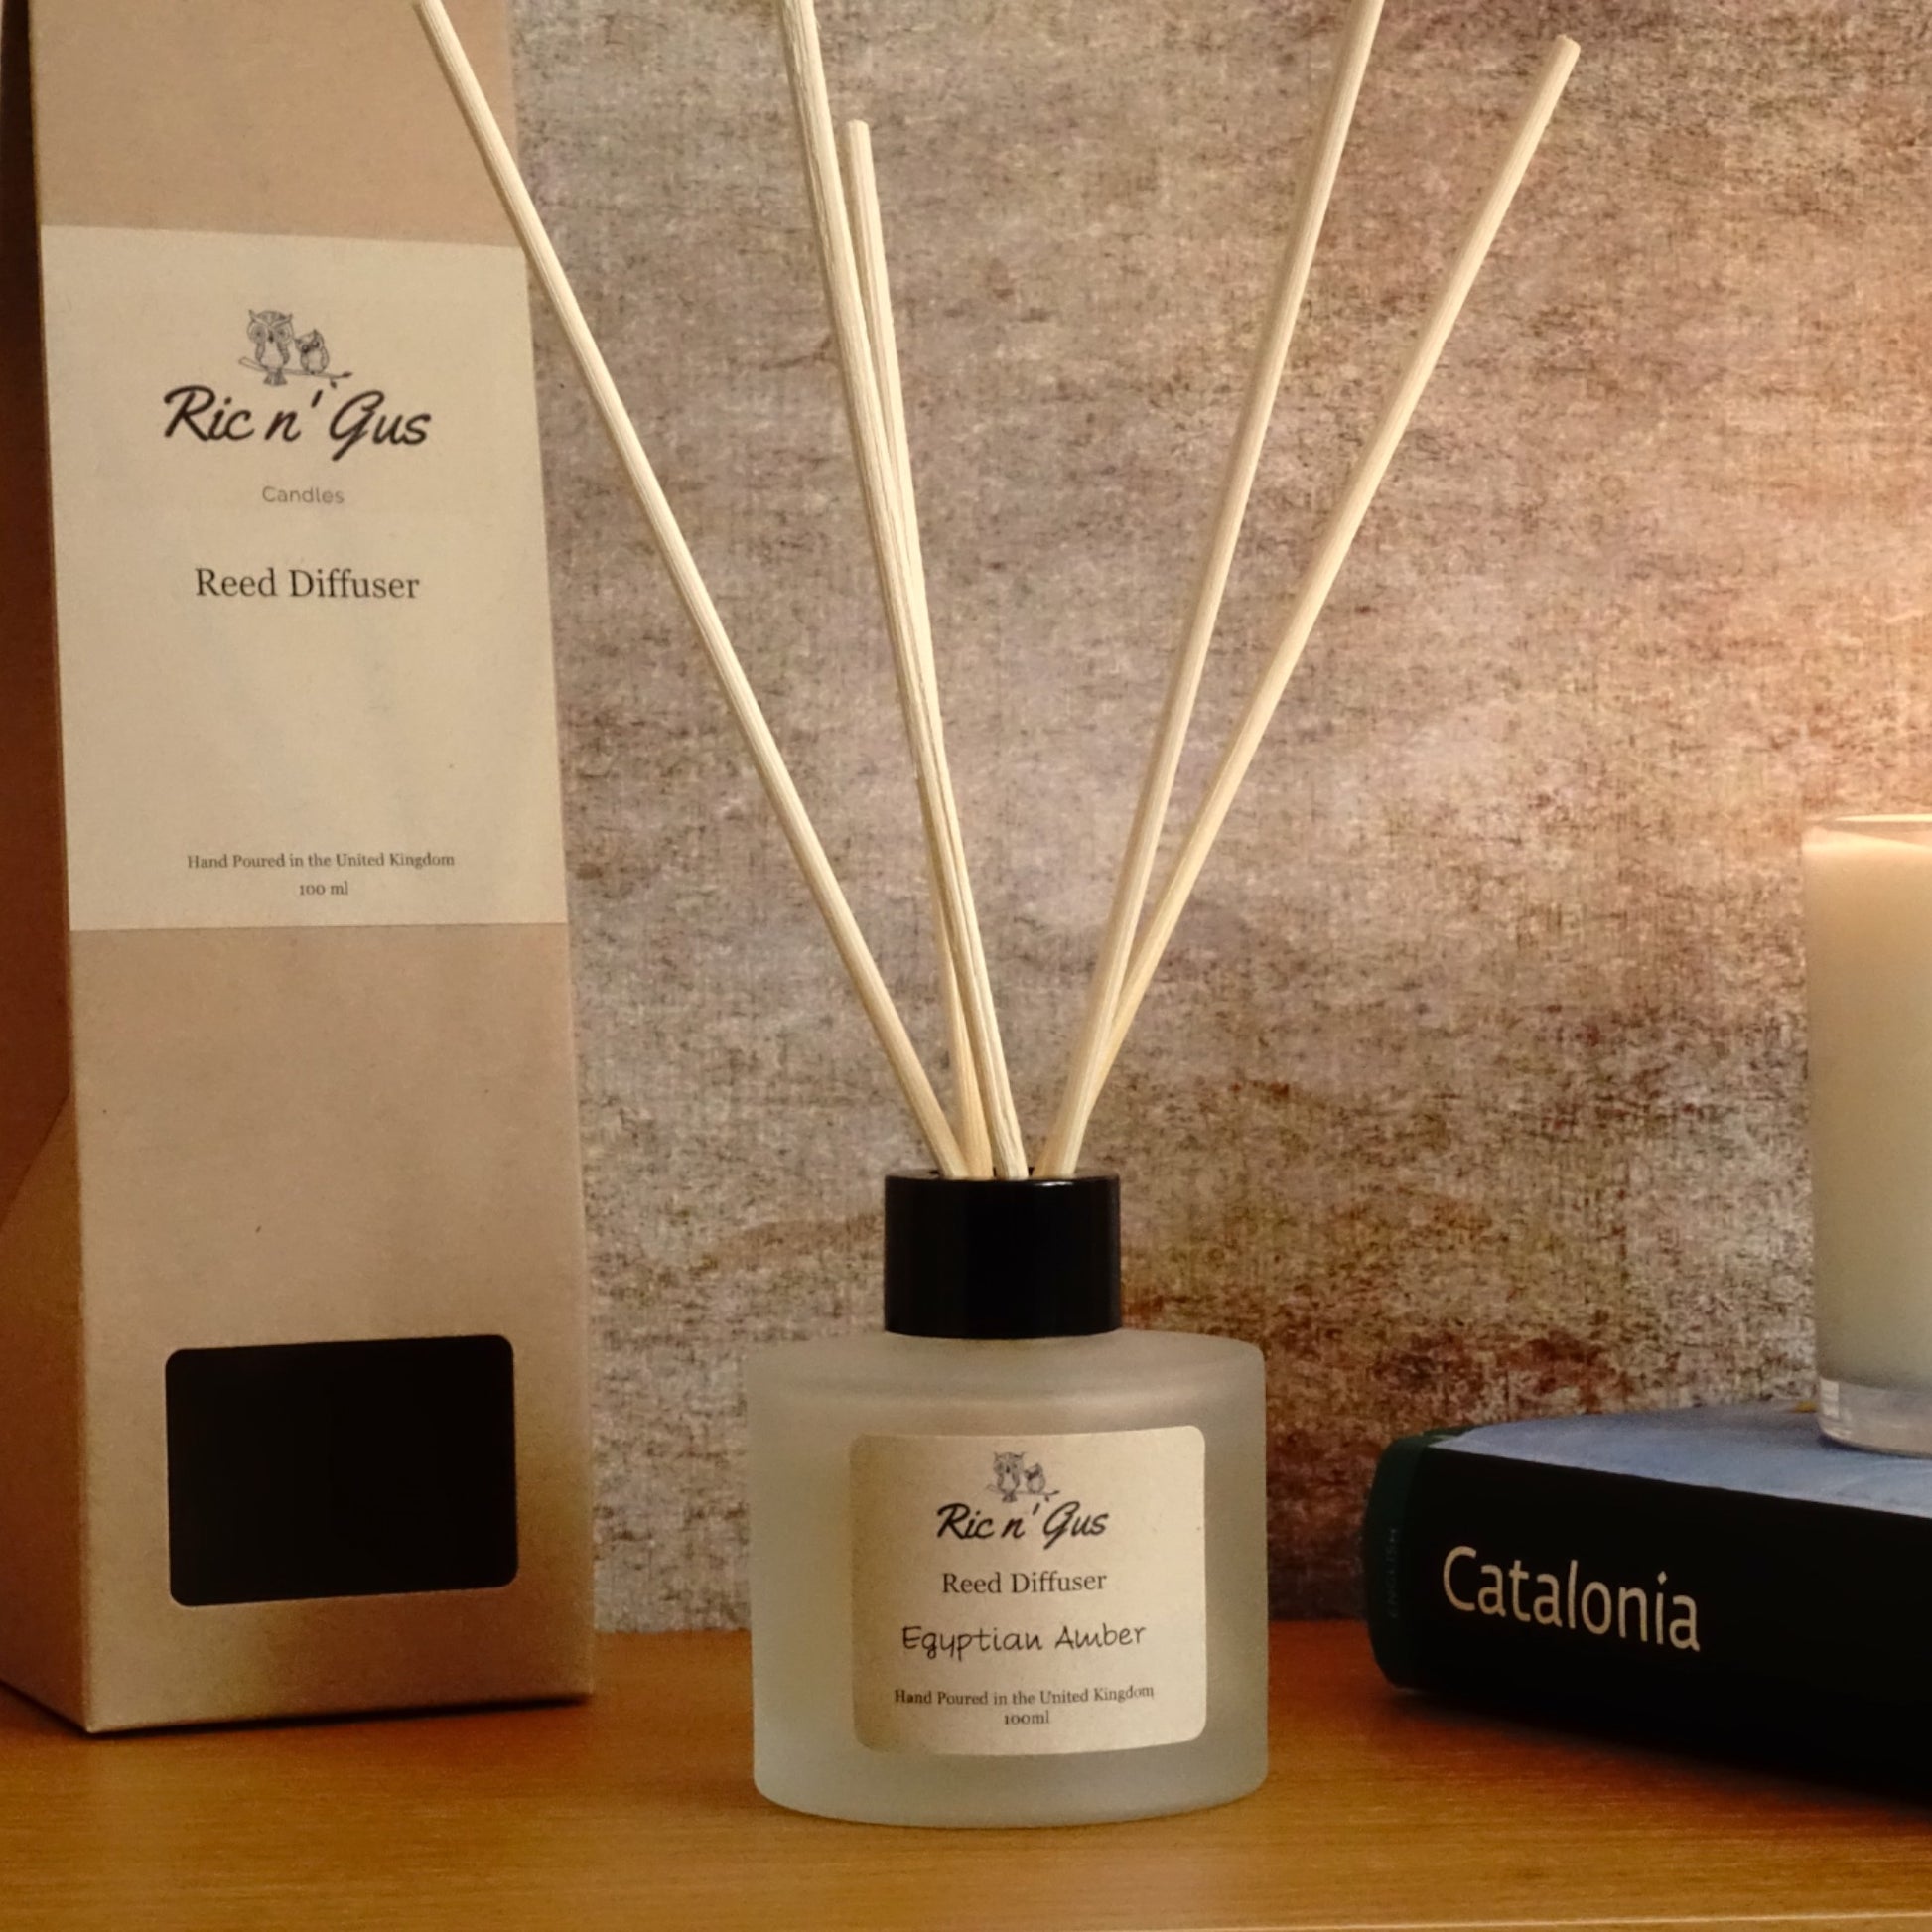 Egyptian Amber Reed Diffuser Ric n'Gus Candles